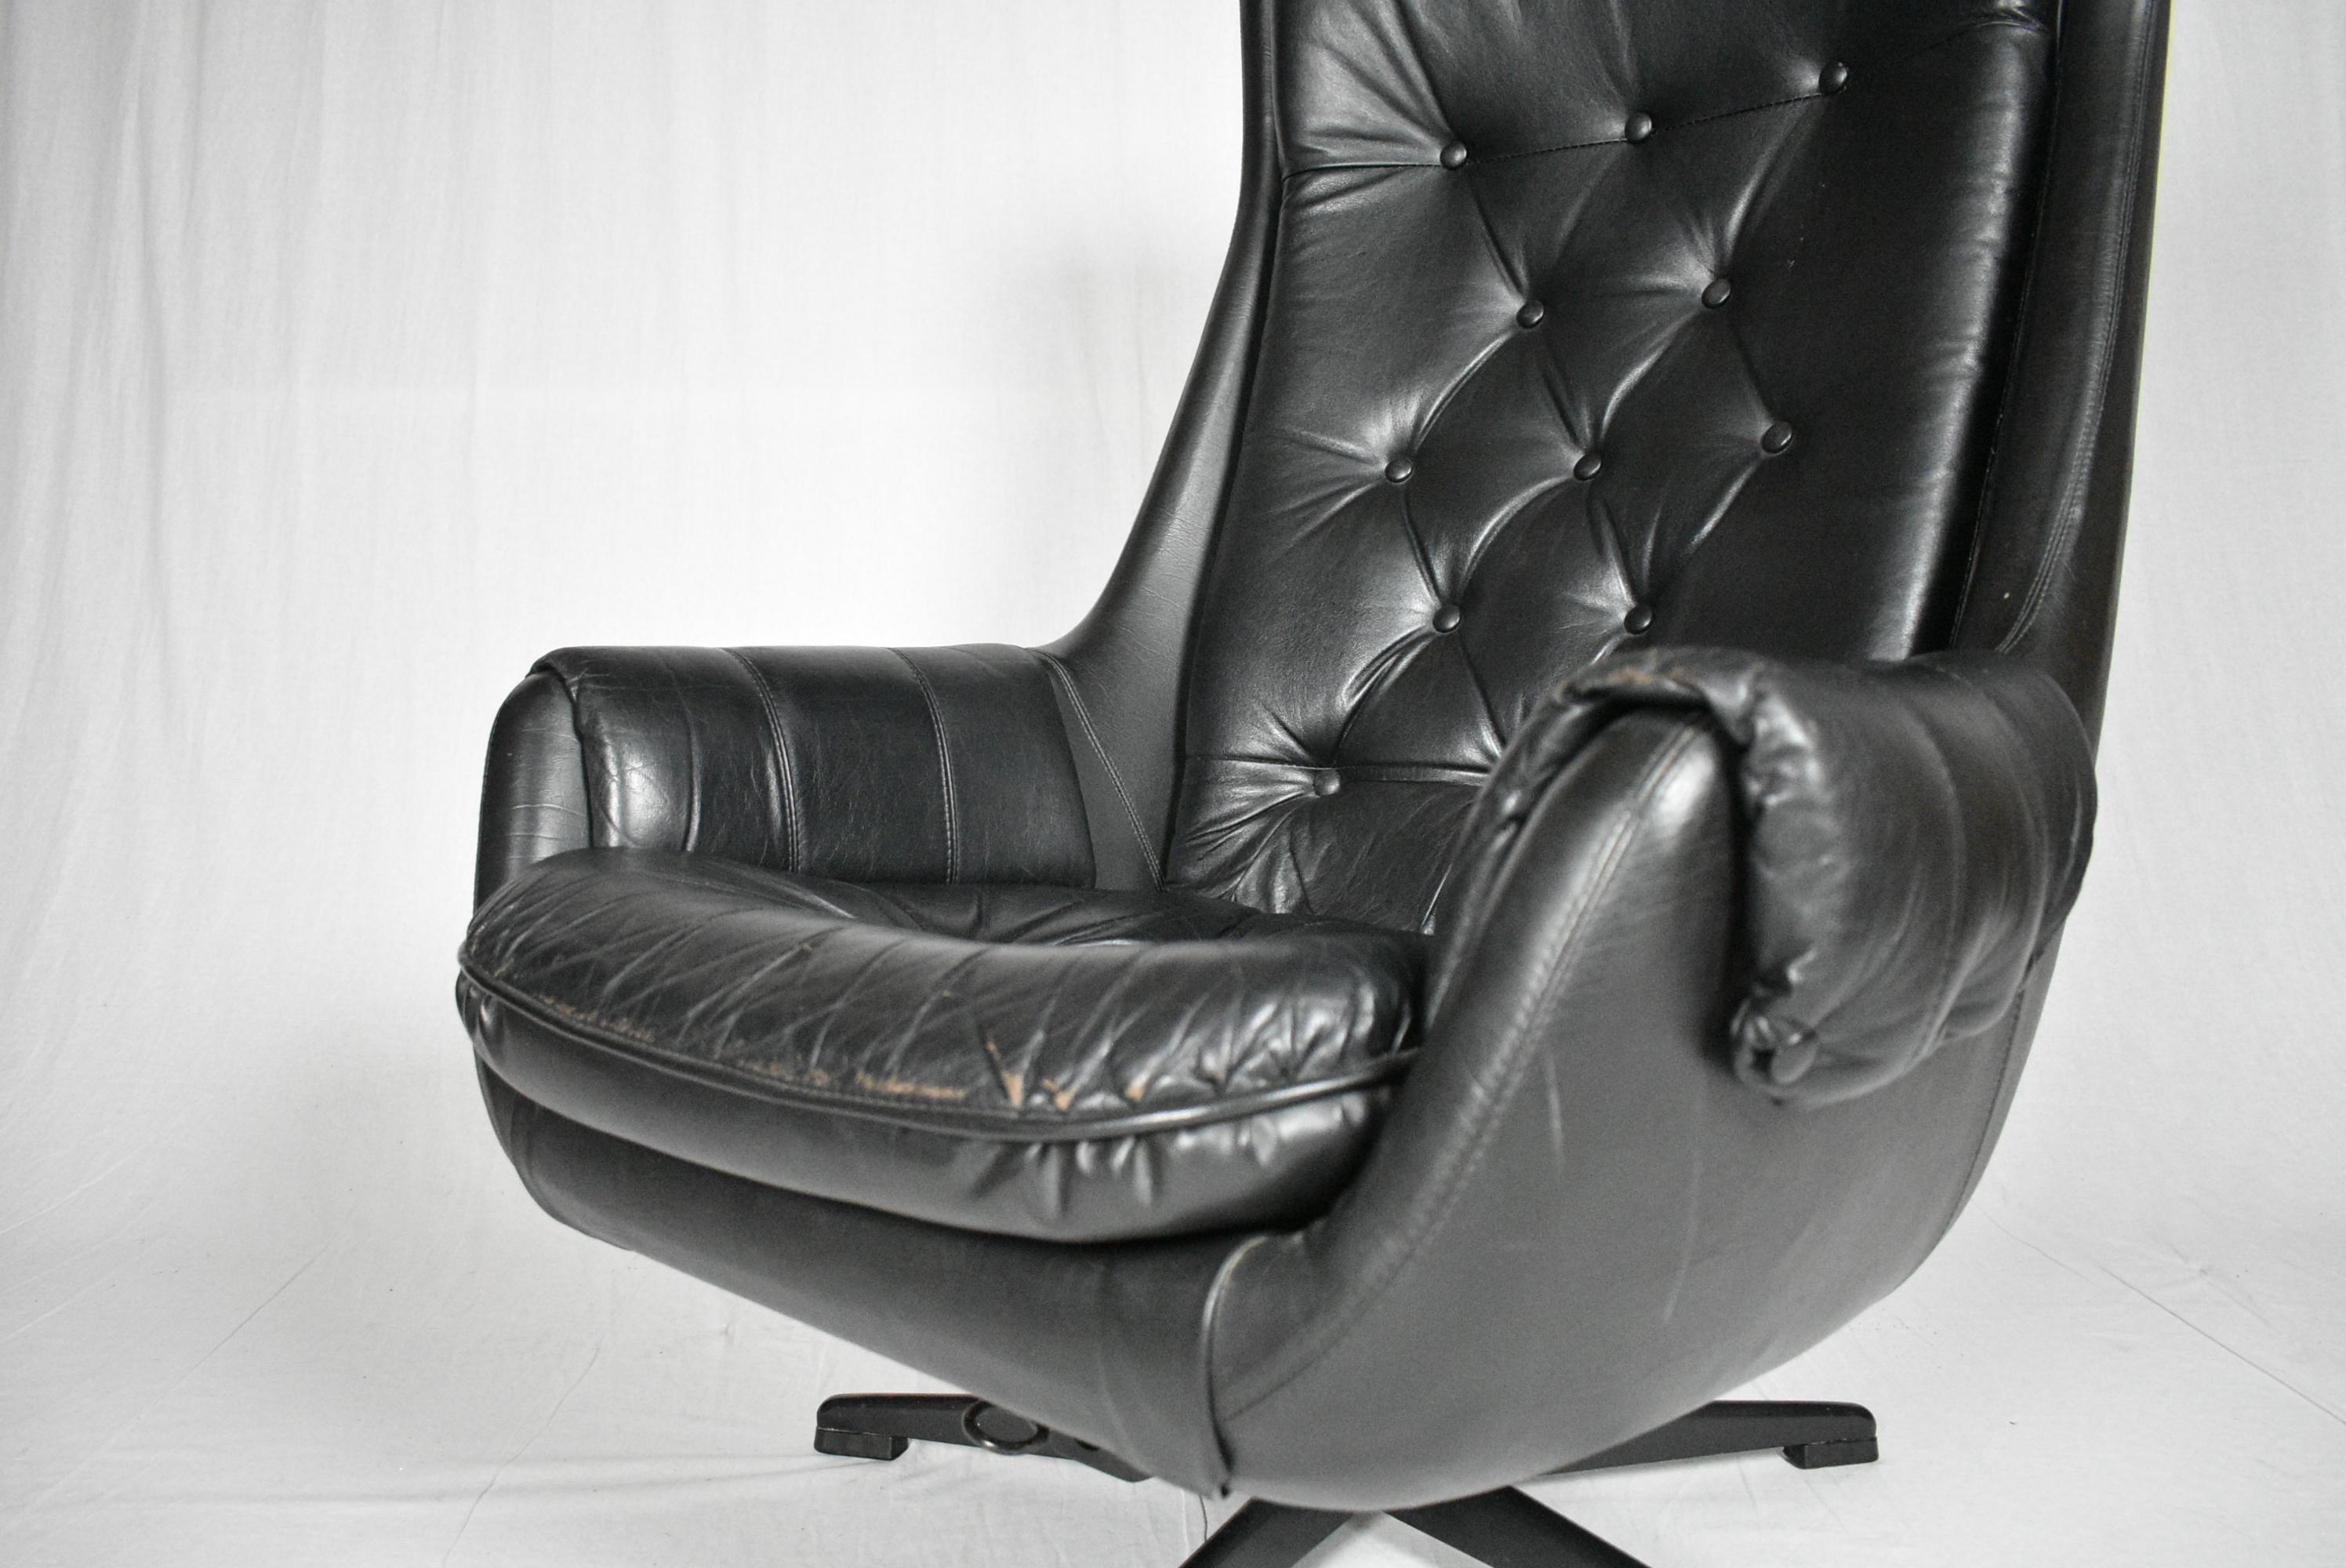 Finnish Design Scandinavian Leather Armchair / Lounge Chair by Peem, 1970s For Sale